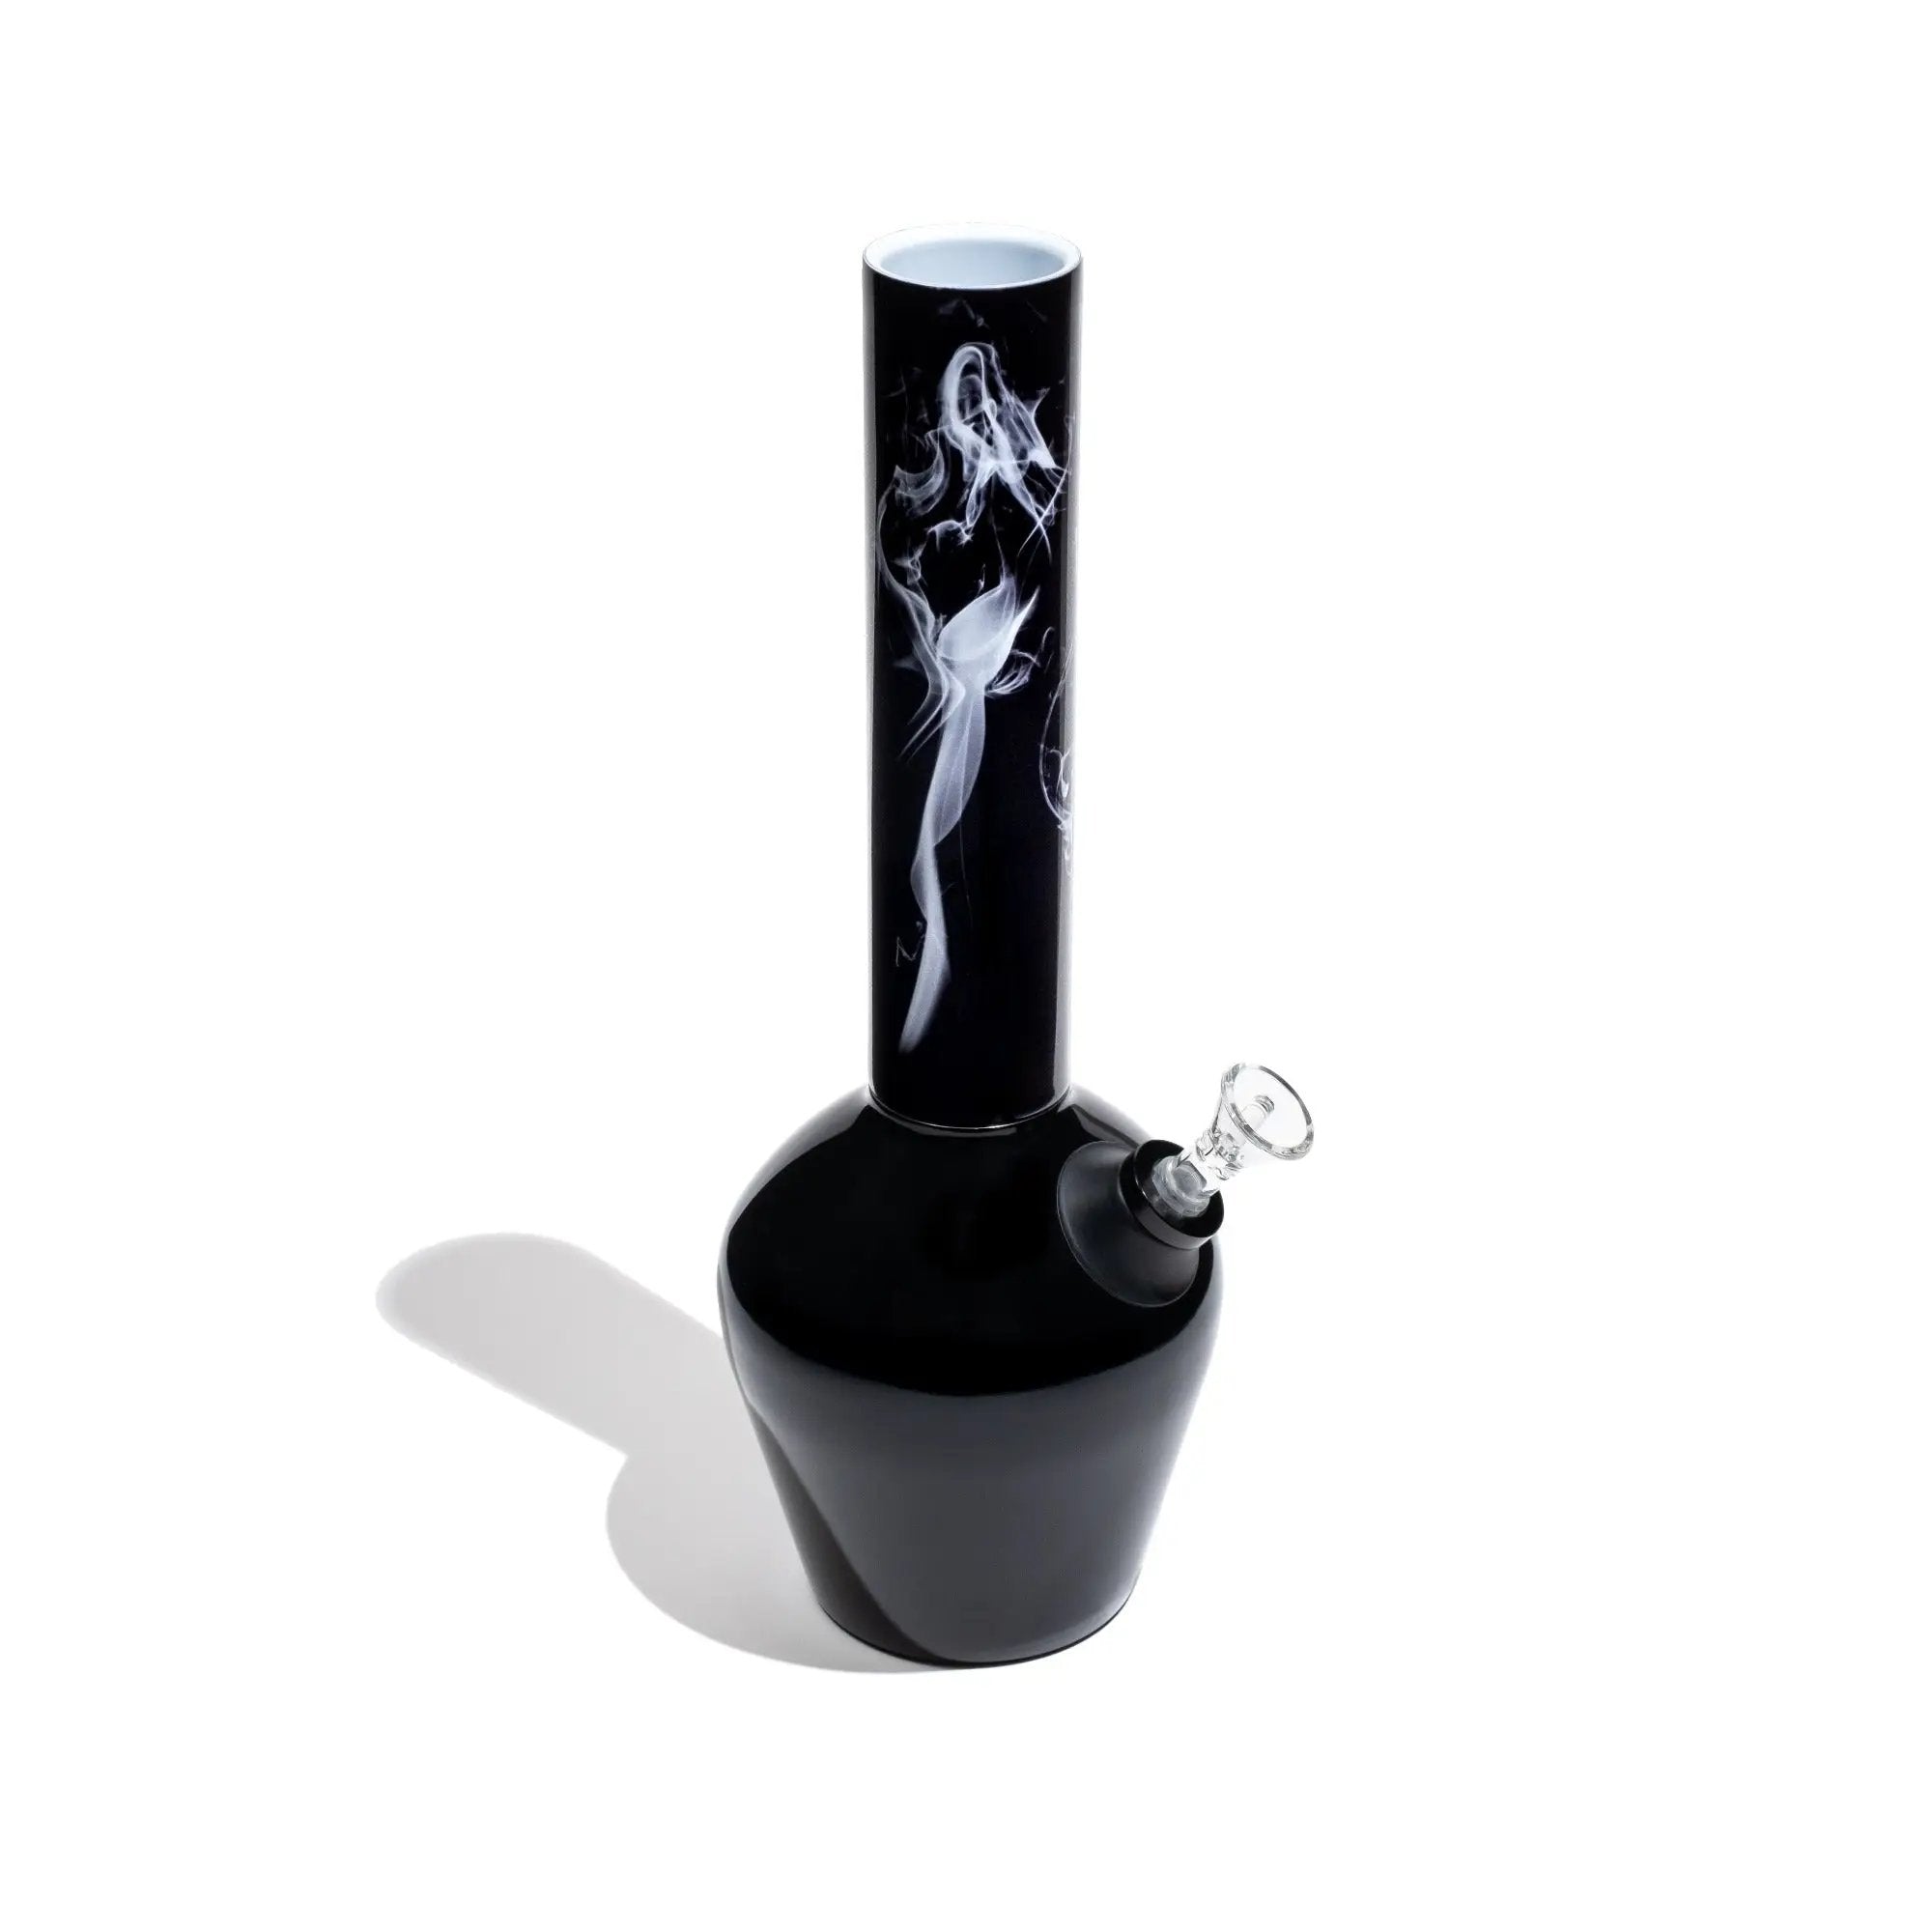 Gloss Black & Smoke Combo by Chill Steel Pipes